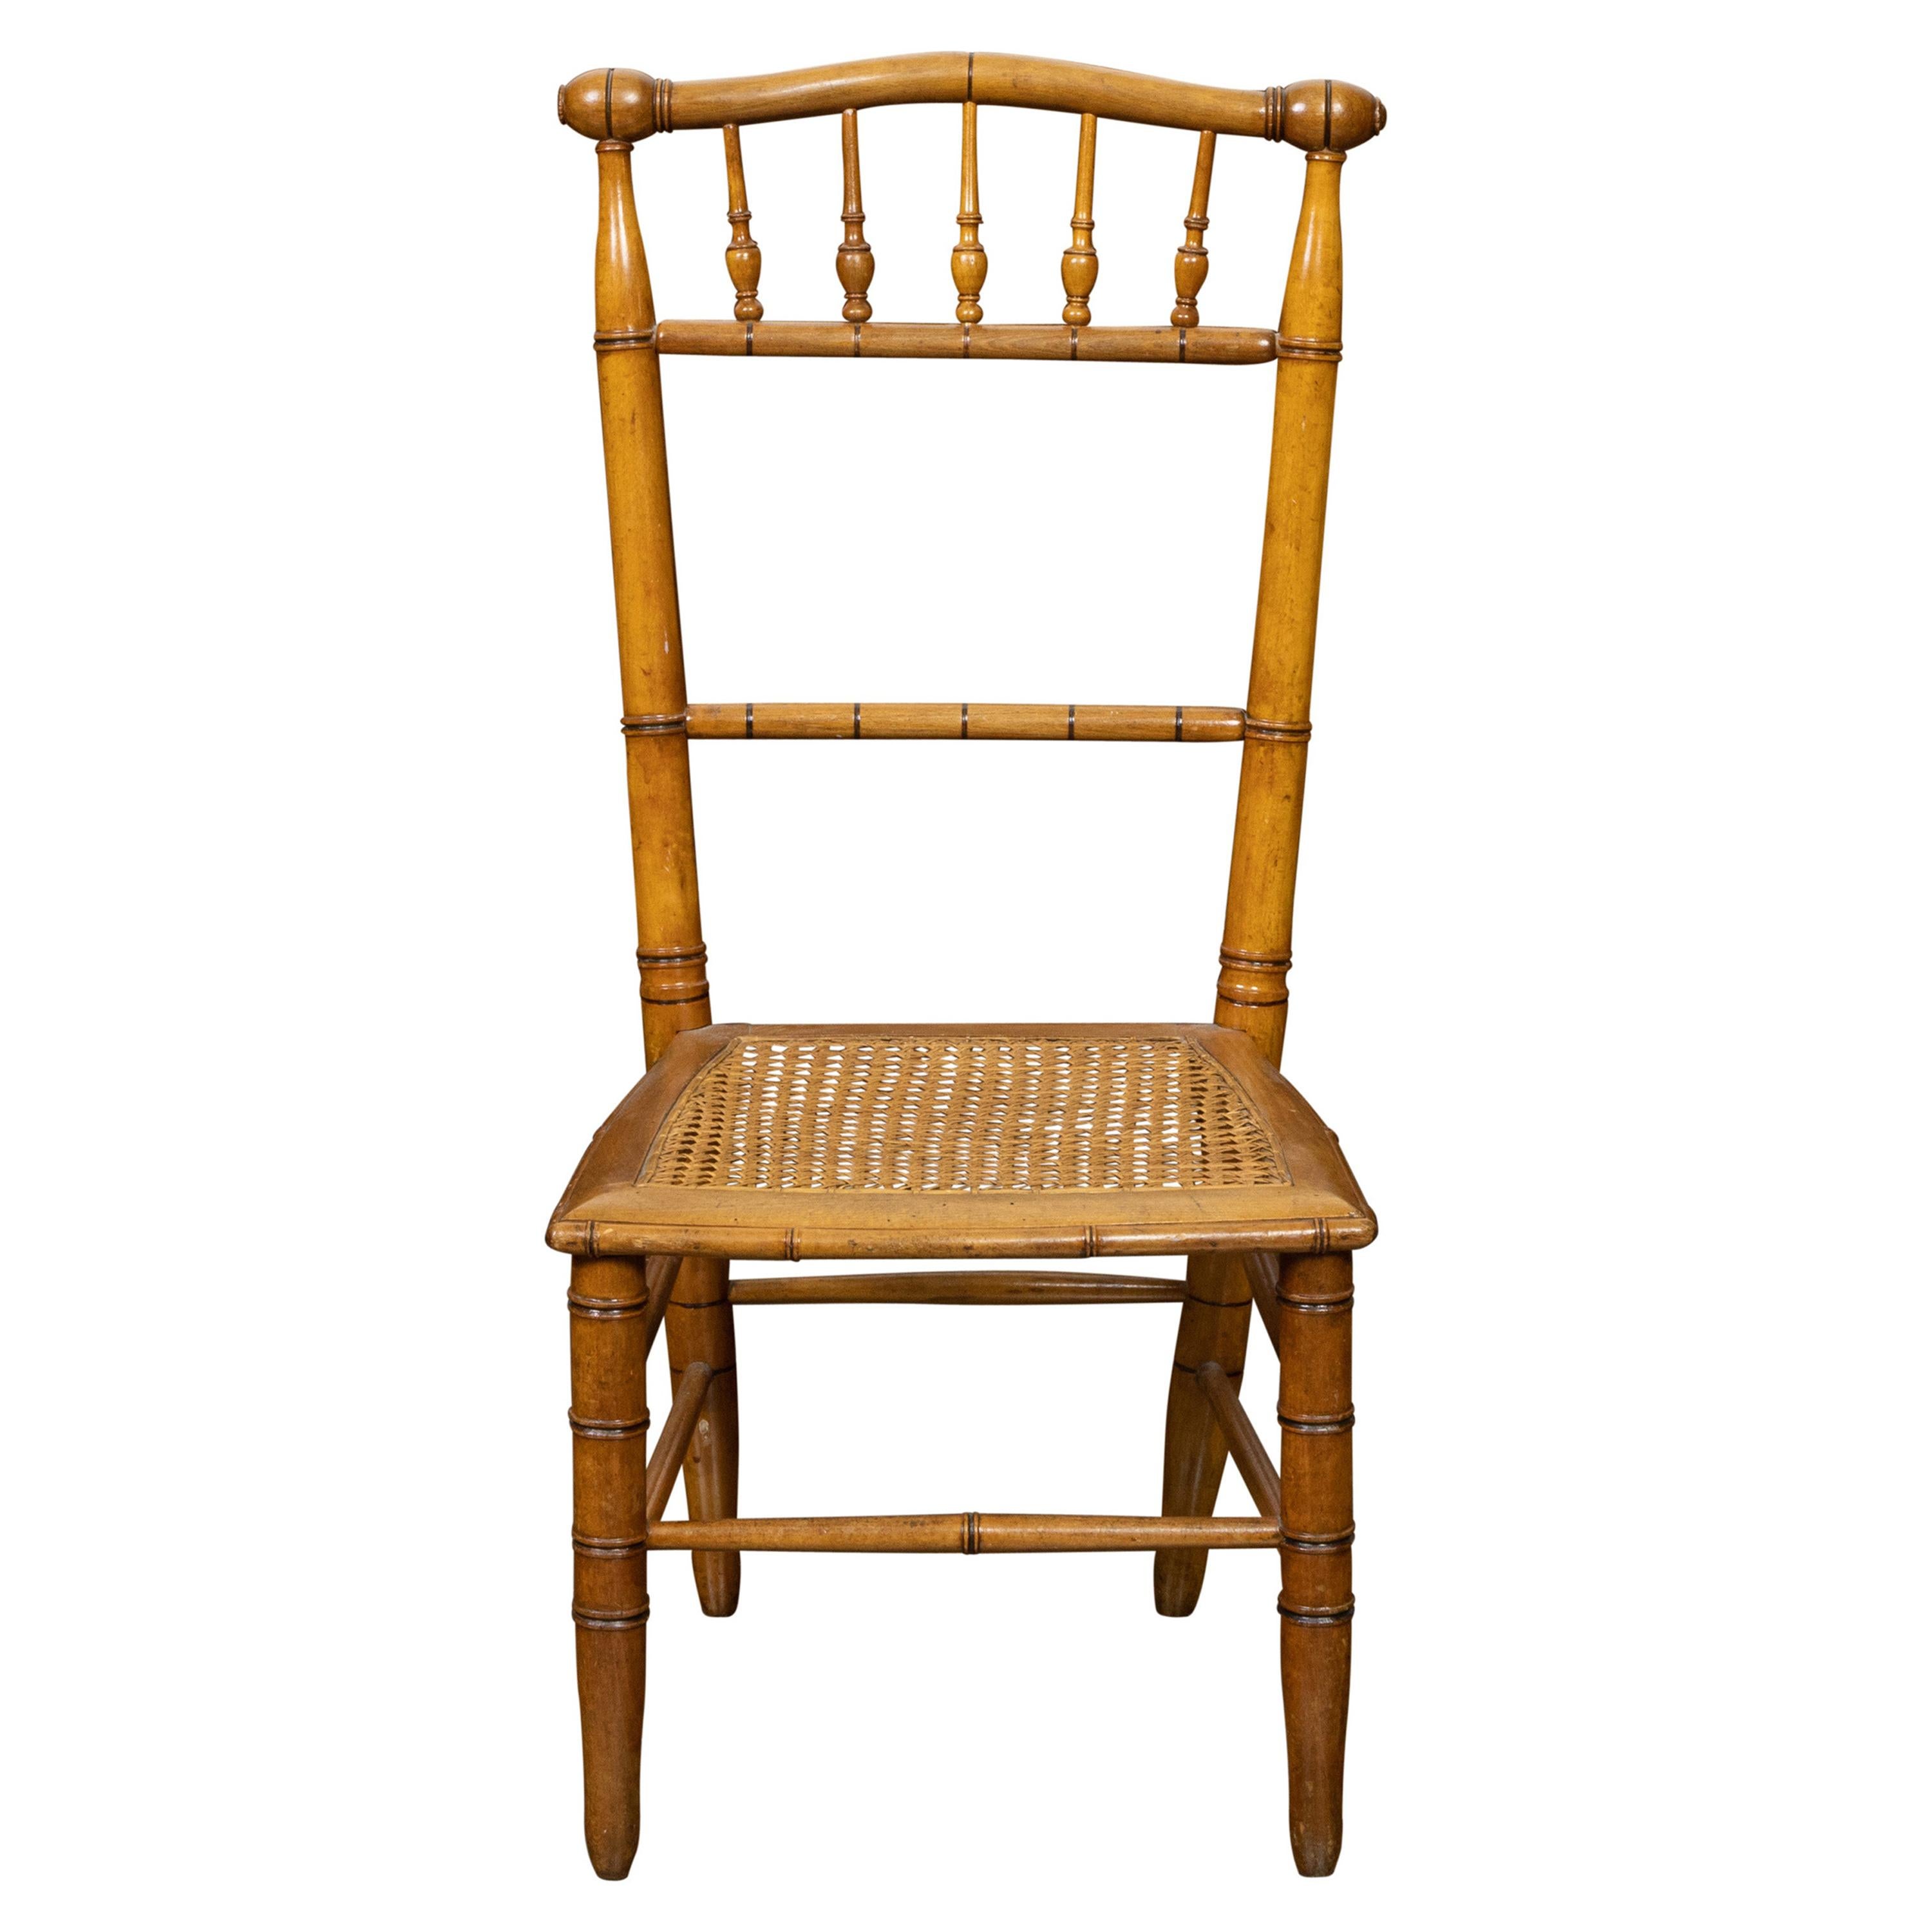 English Turn of the Century 1900s Bamboo Slipper Chair with Cane Seat